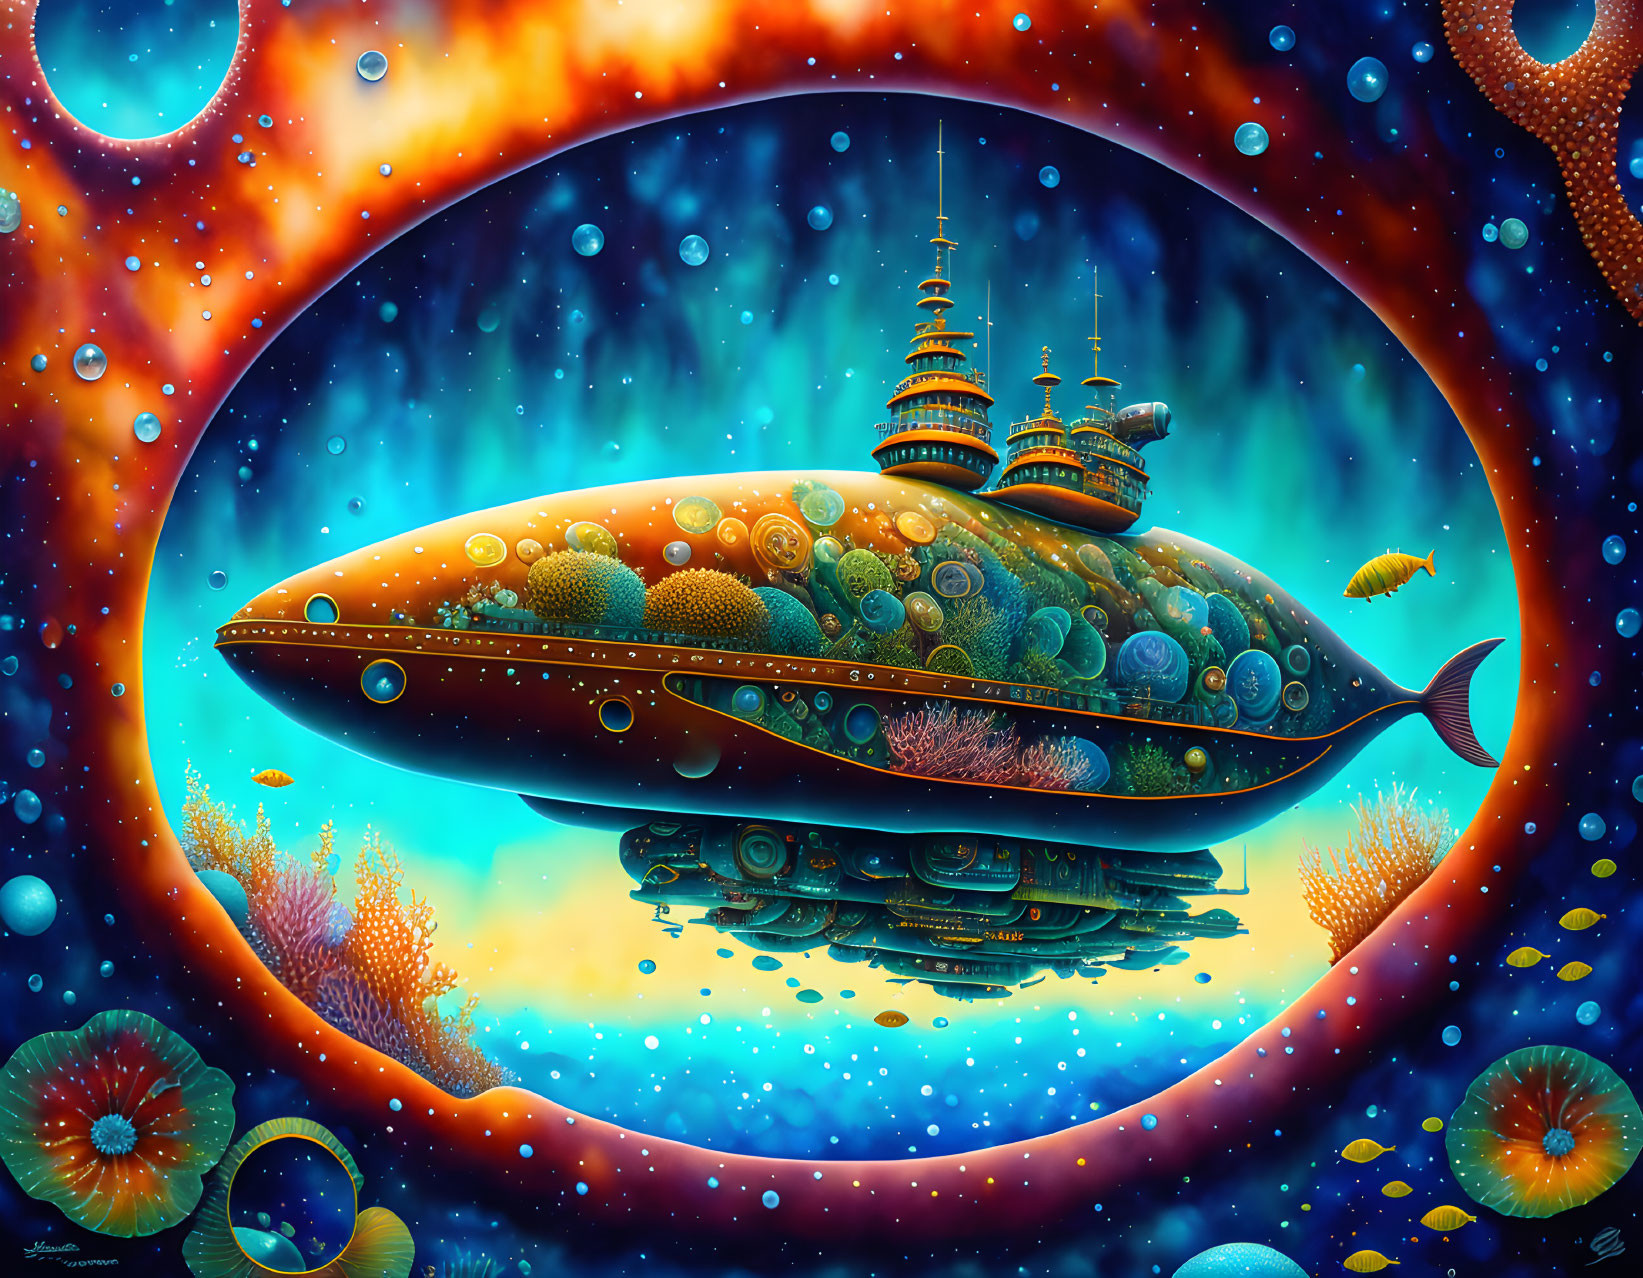 Whimsical submarine-like structure with towers and domes in vibrant undersea scene